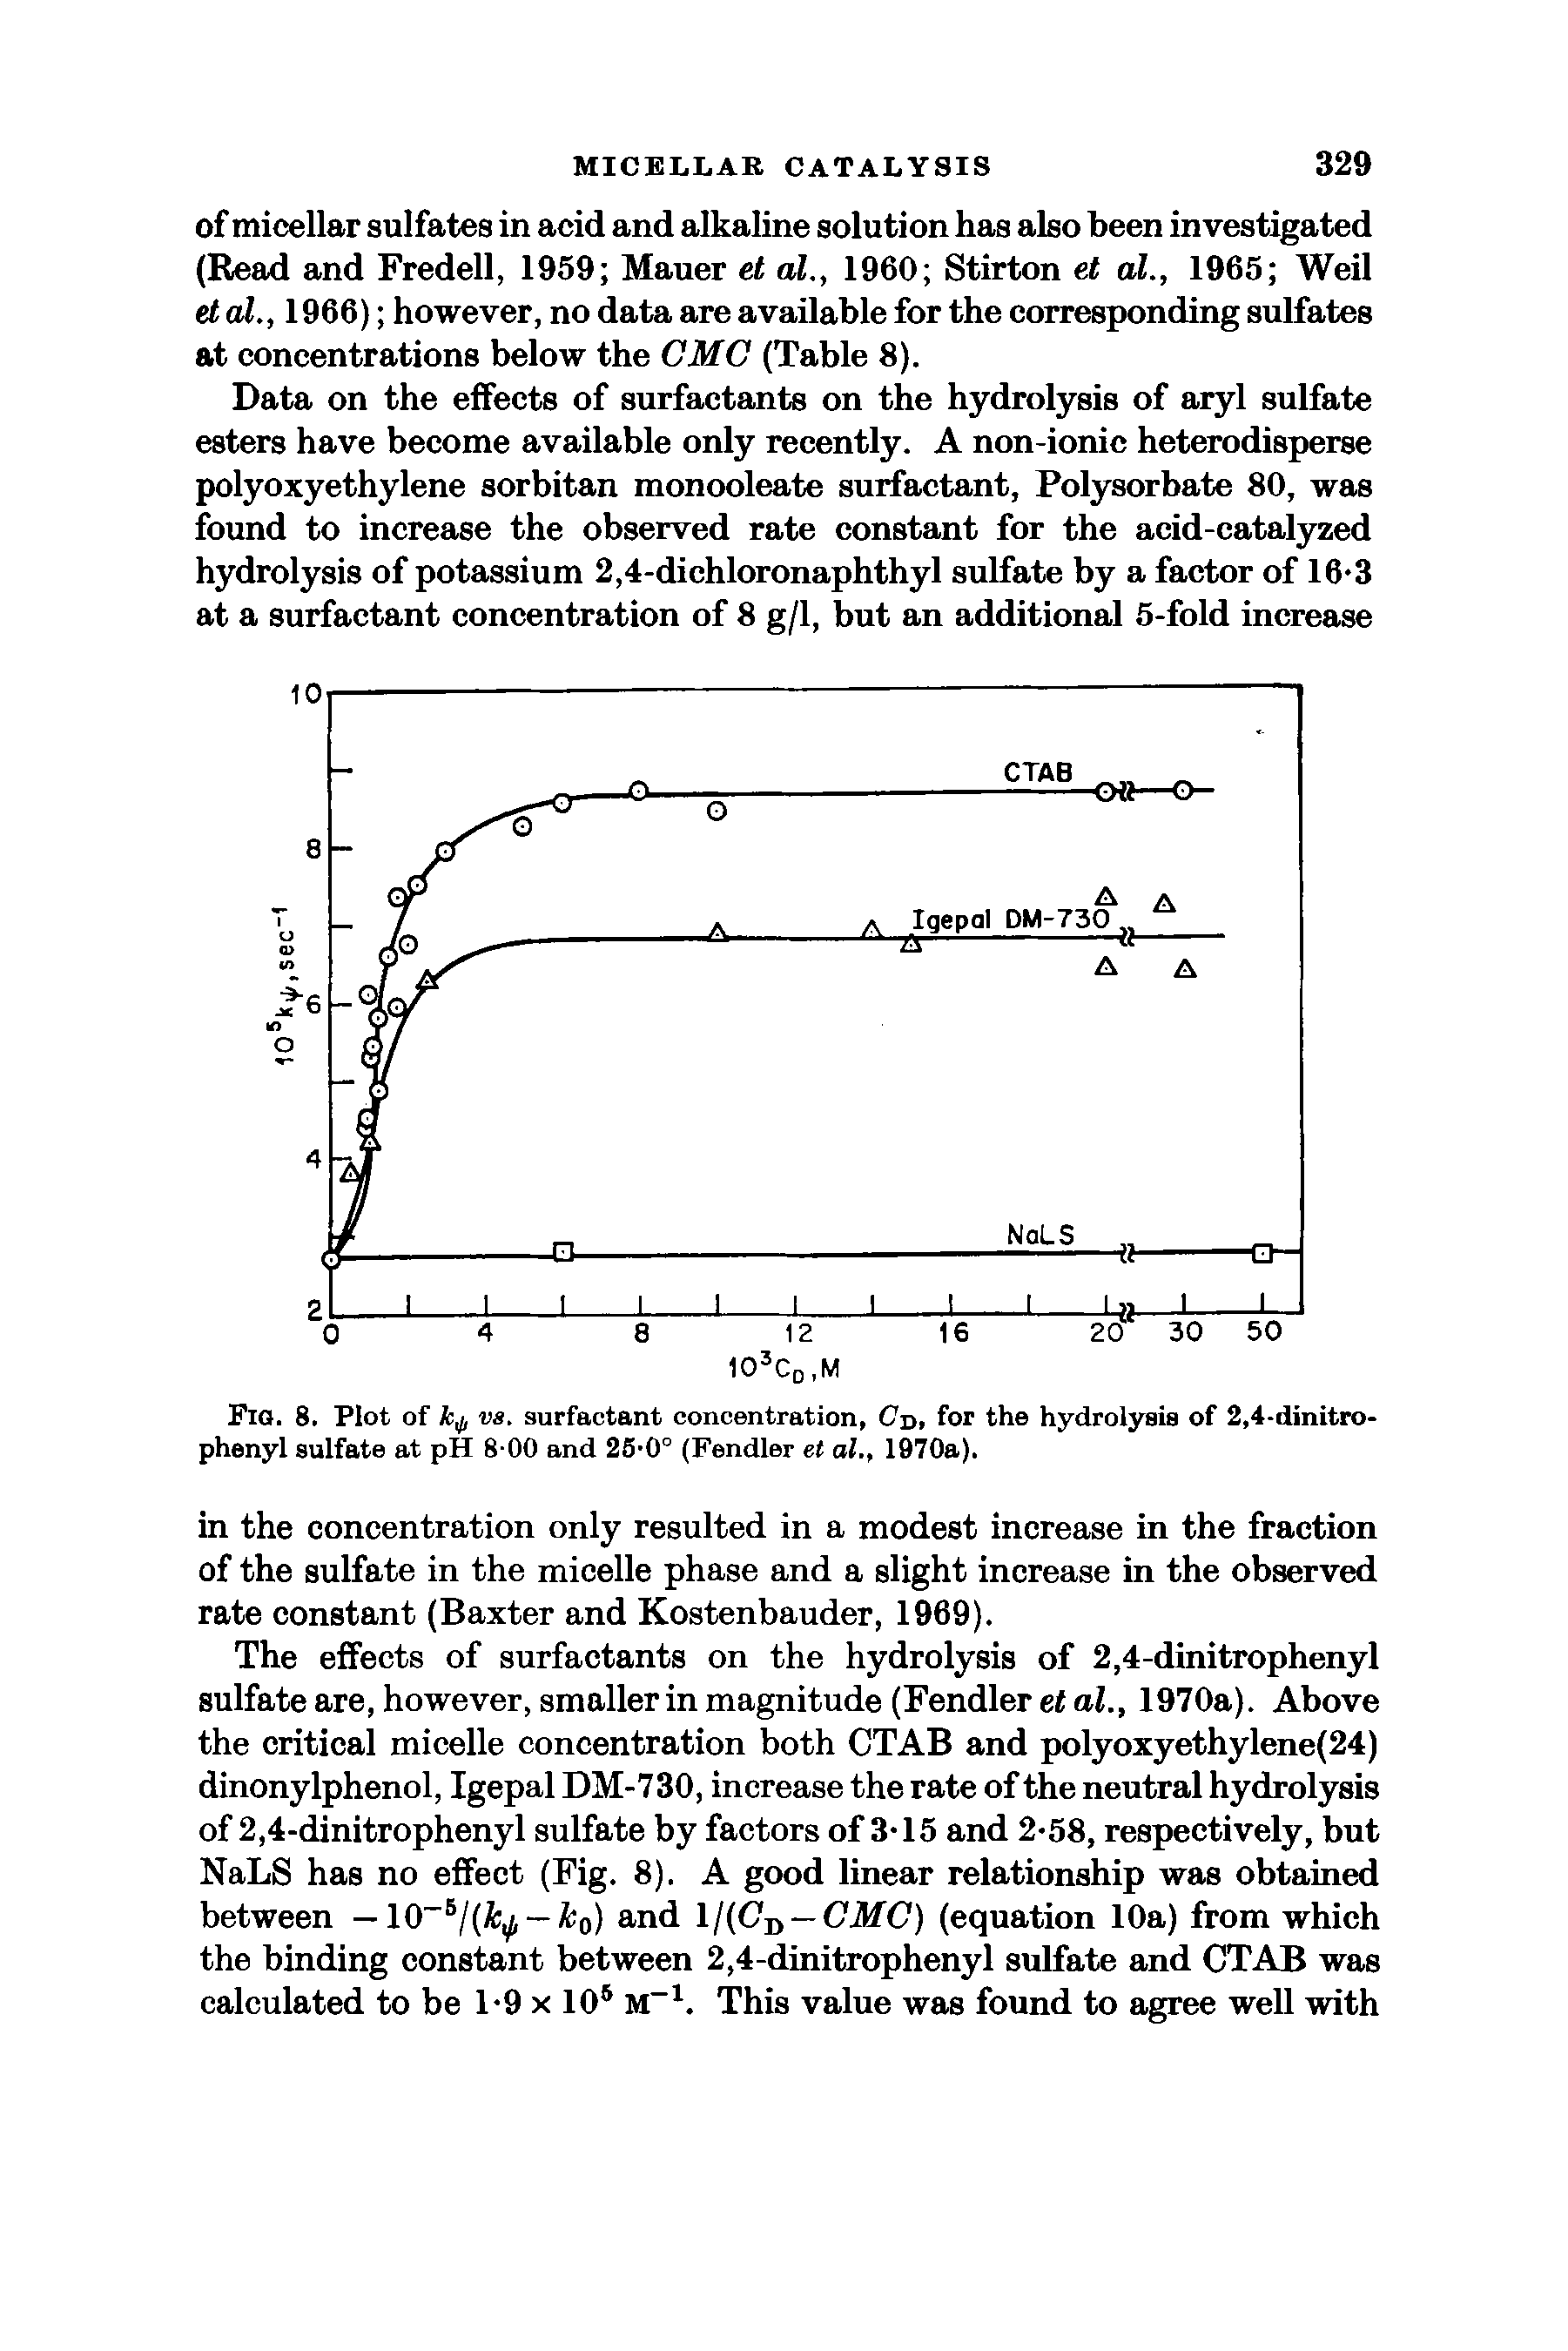 Fig. 8. Plot of va. surfactant concentration, Cn, for the hydrolysis of 2,4-dinitro-phenyl sulfate at pH 8 00 and 25-0° (Fendler et al., 1970a).